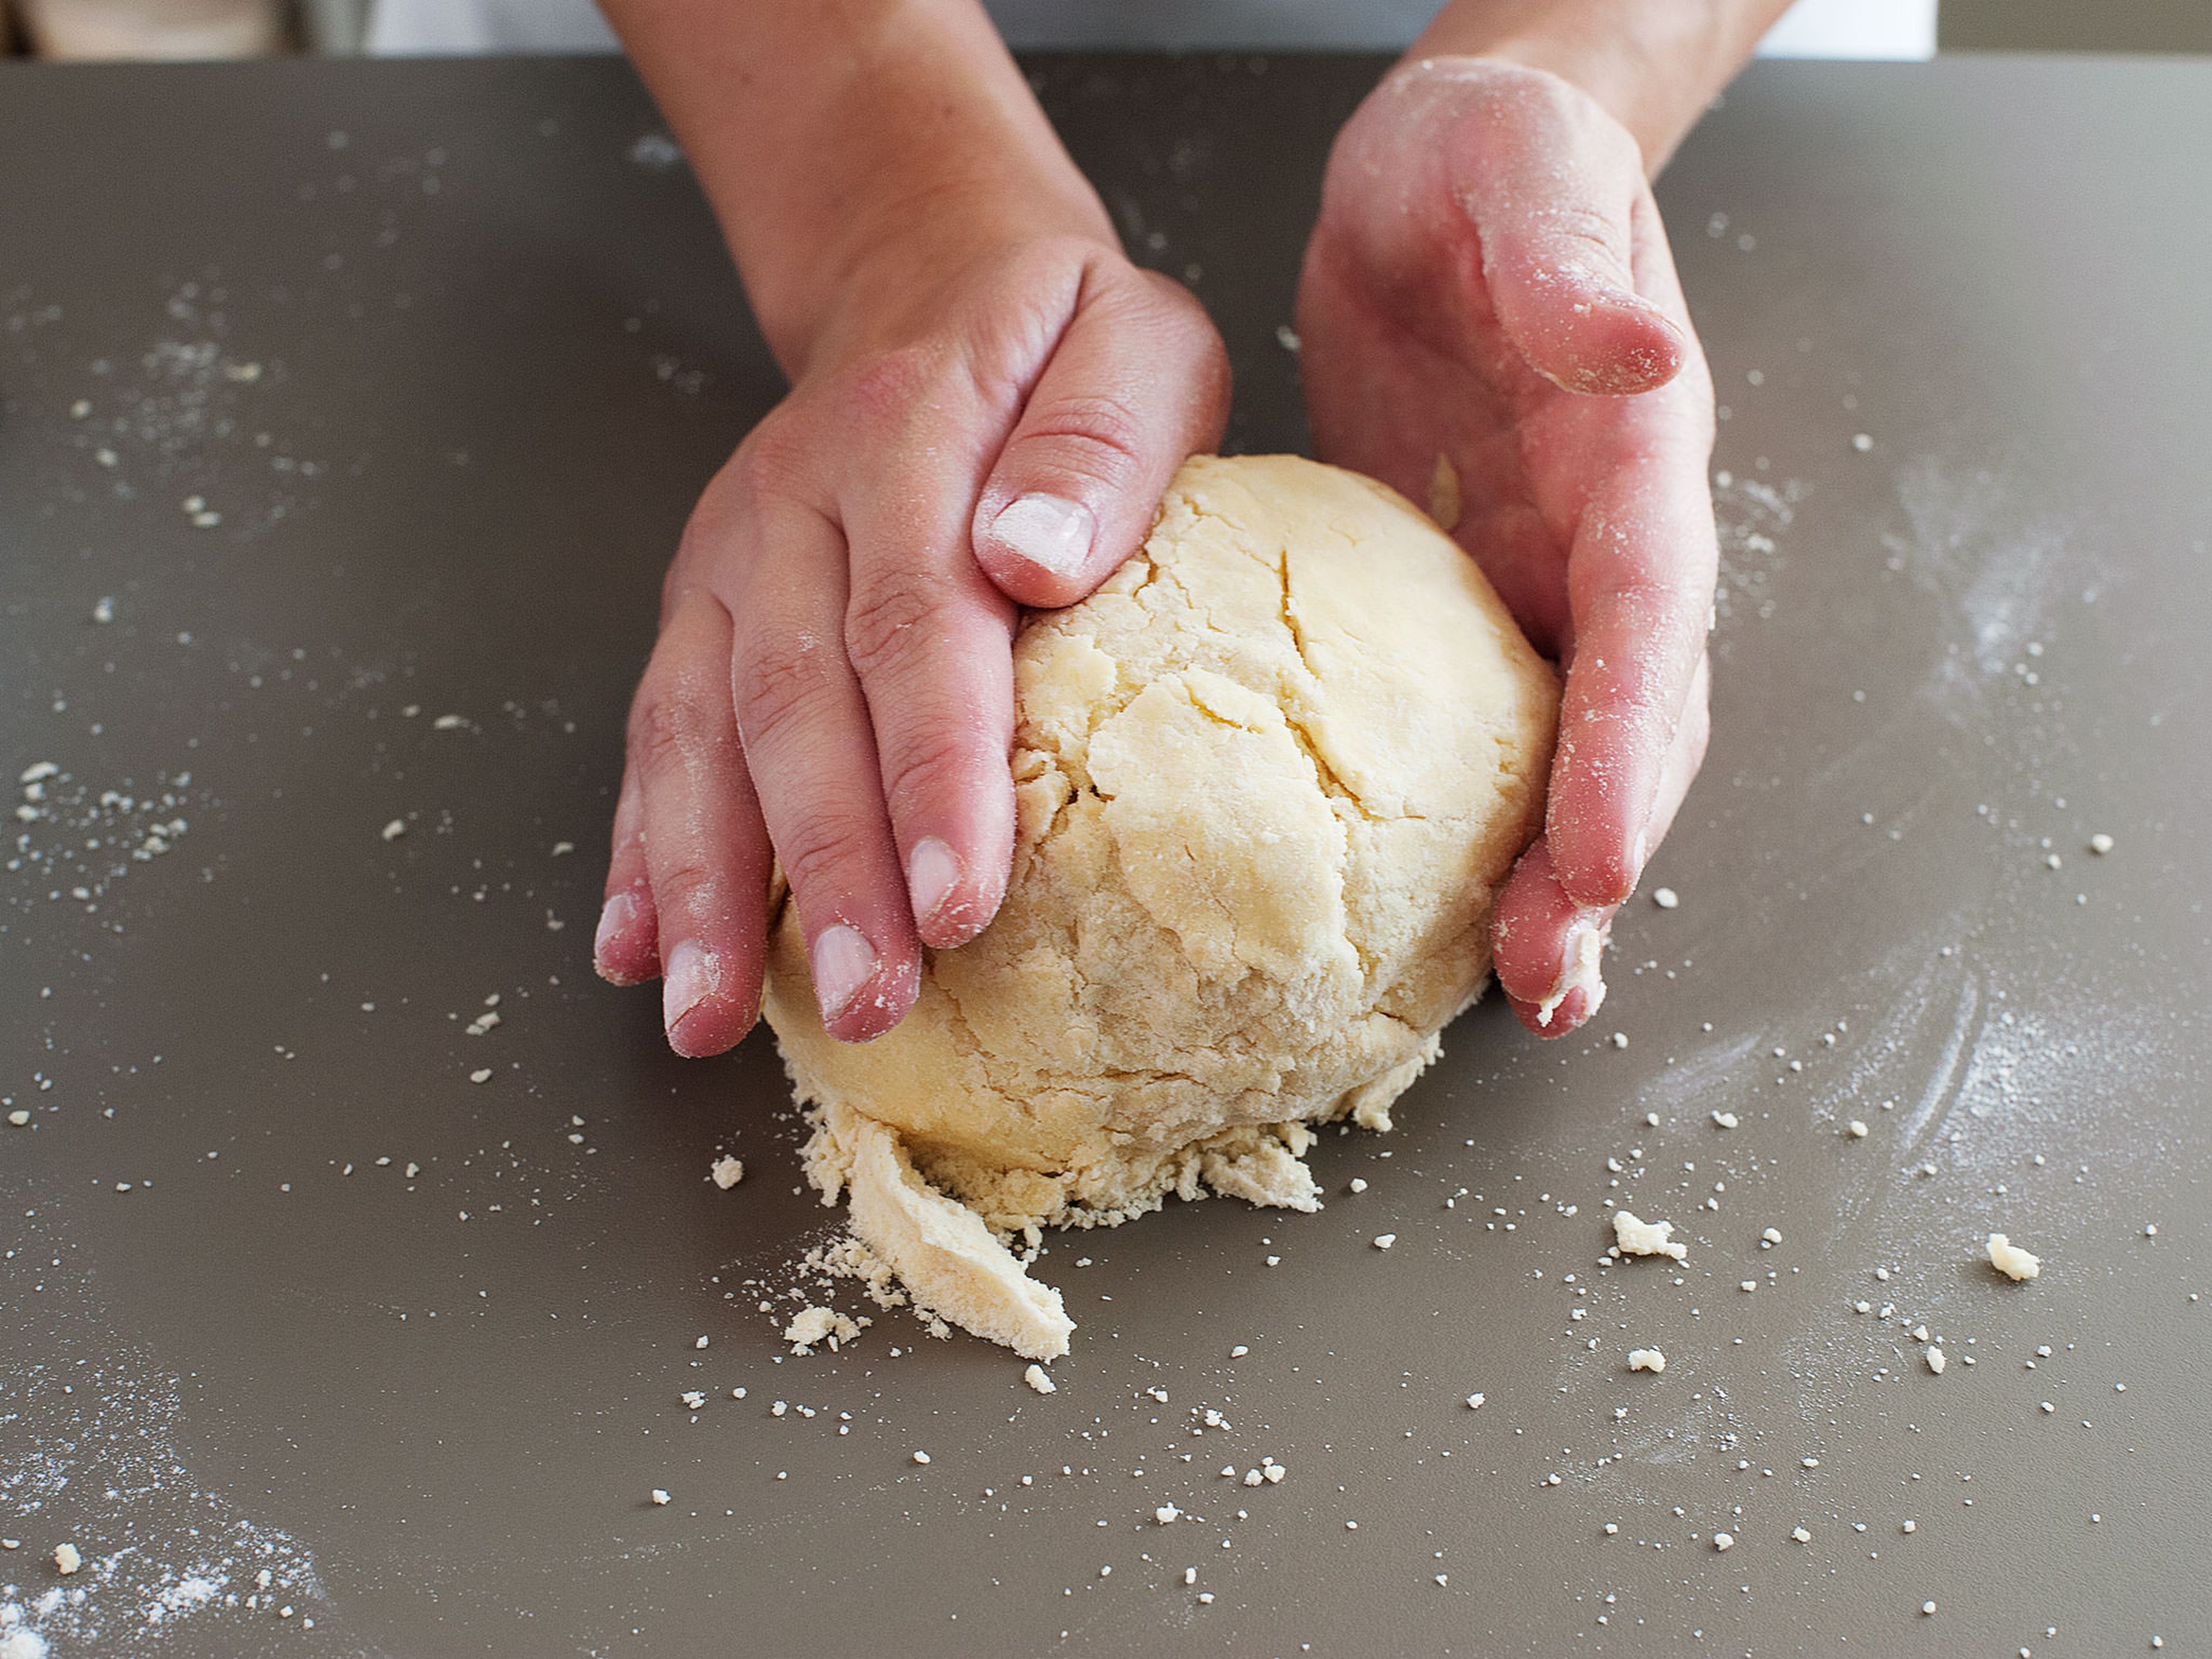 Scrape dough onto a lightly floured work surface and press the dough into a compact disc, then halve and form each half into a disc. Wrap in plastic wrap and refrigerate for an hour.